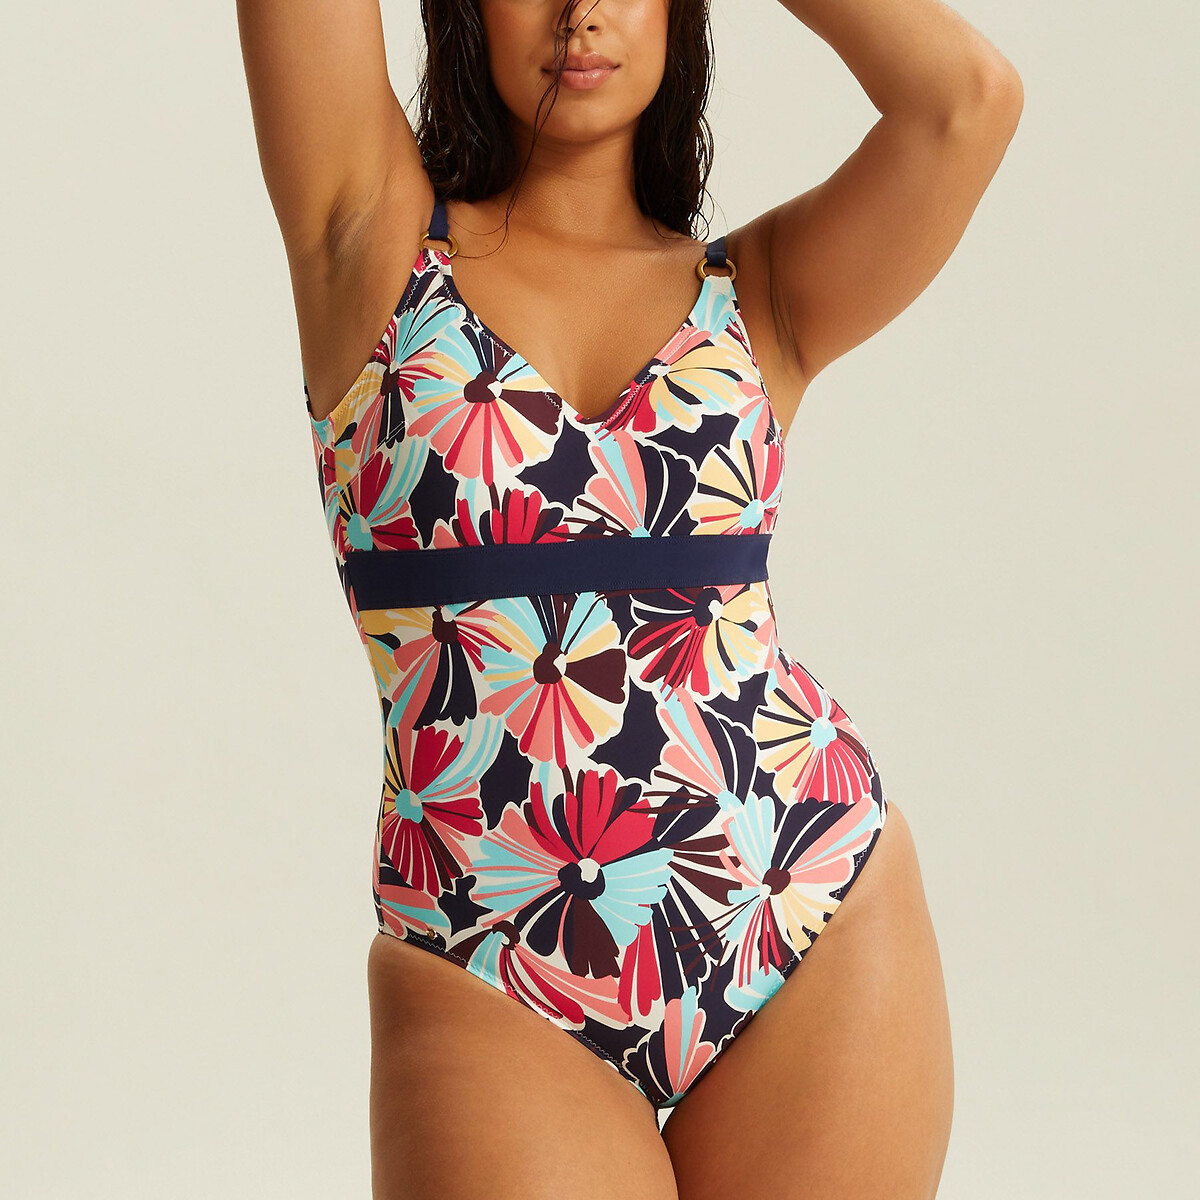 Antioco Premium Recycled Swimsuit in Floral Print